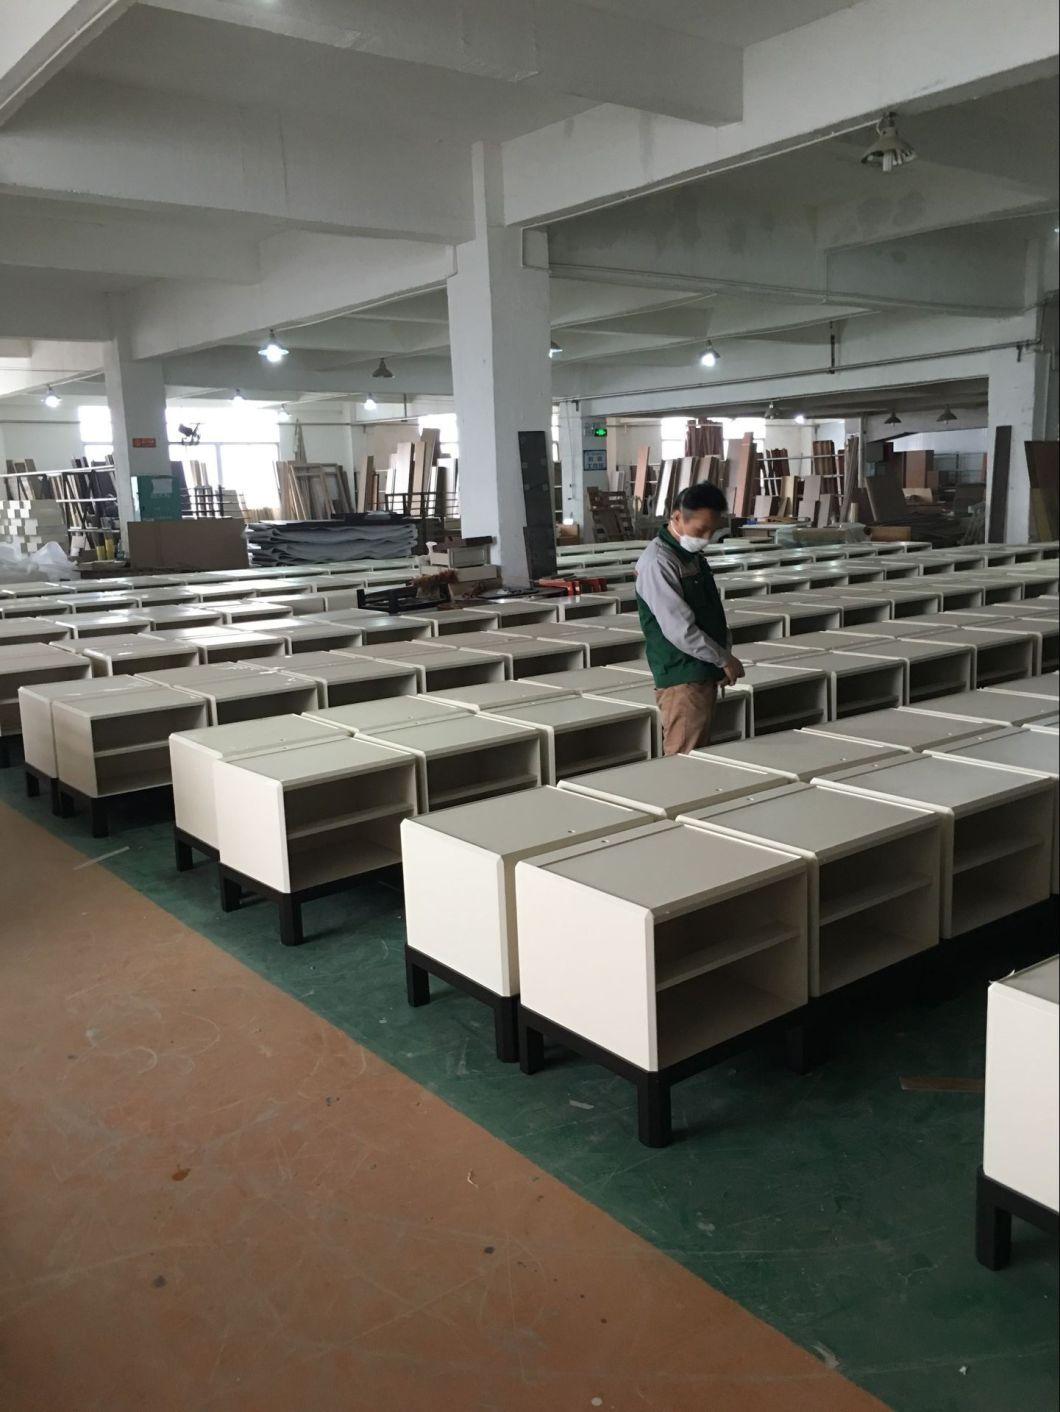 China Foshan Manufacture Factory Budget Hotel Bedroom Furniture for Indian Hotel